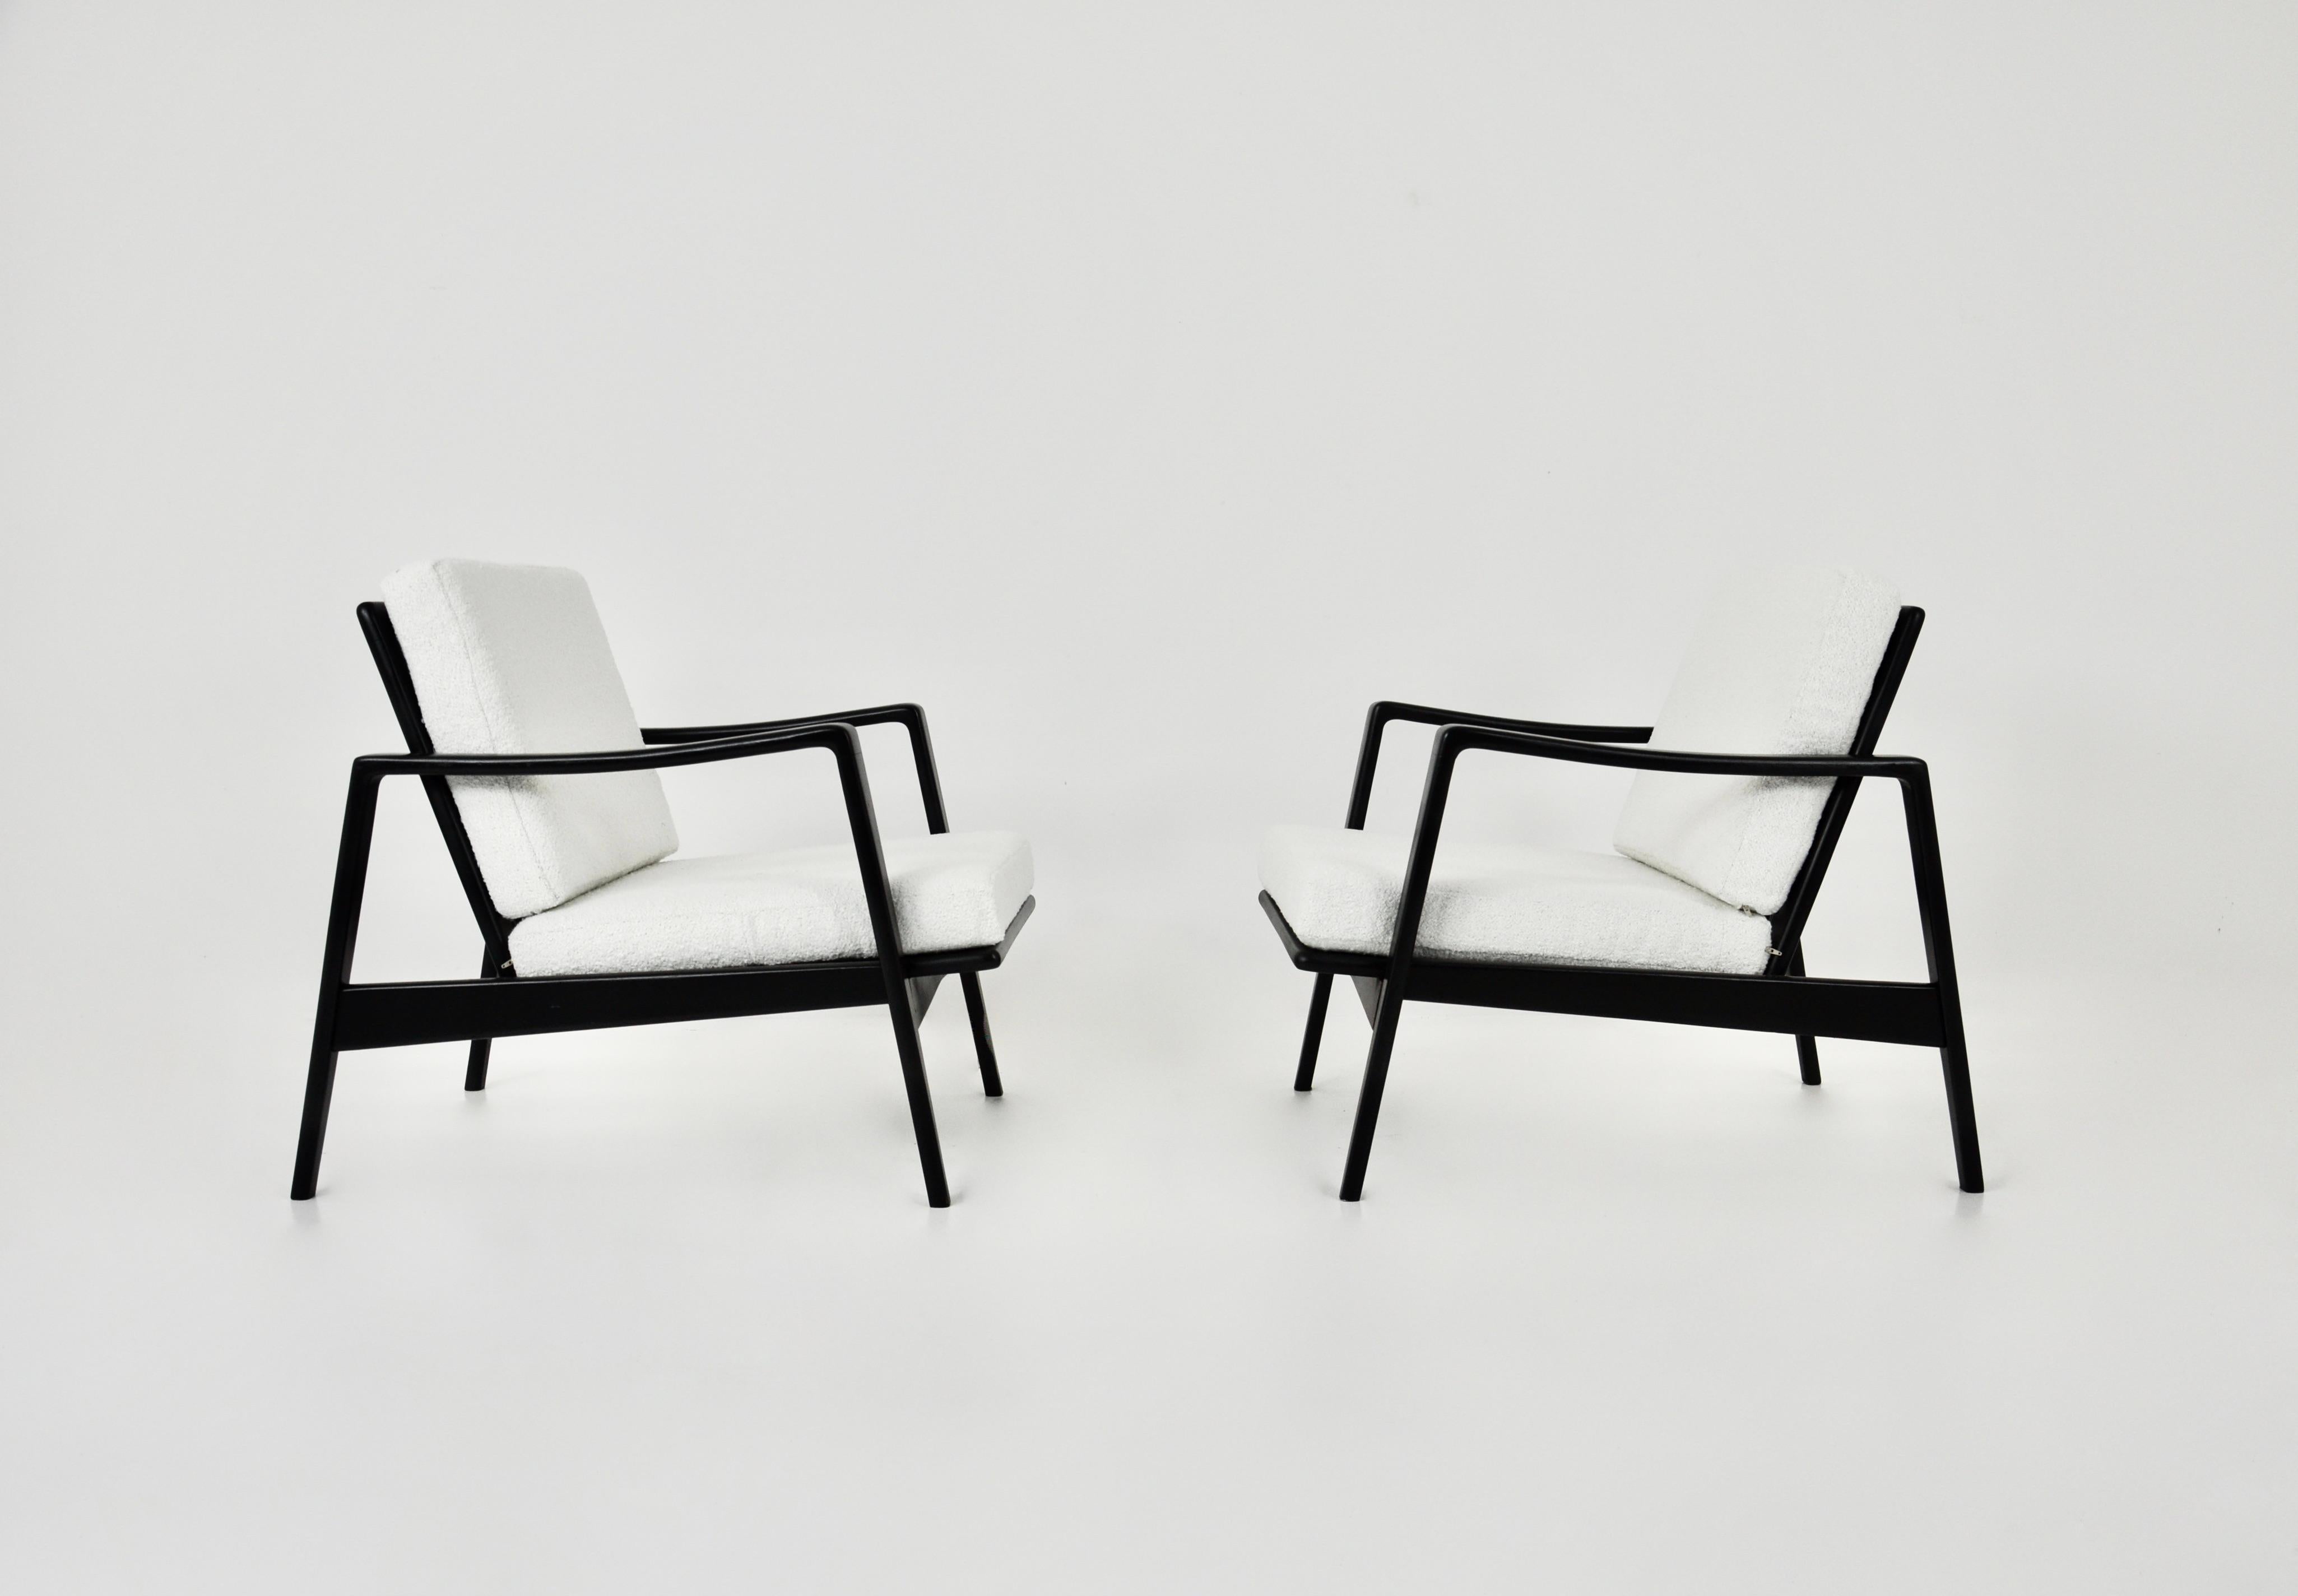 Pair of Scandinavian Lounge Chairs by Arne Wahl Iversen for Komfort, 1950s In Good Condition For Sale In Lasne, BE